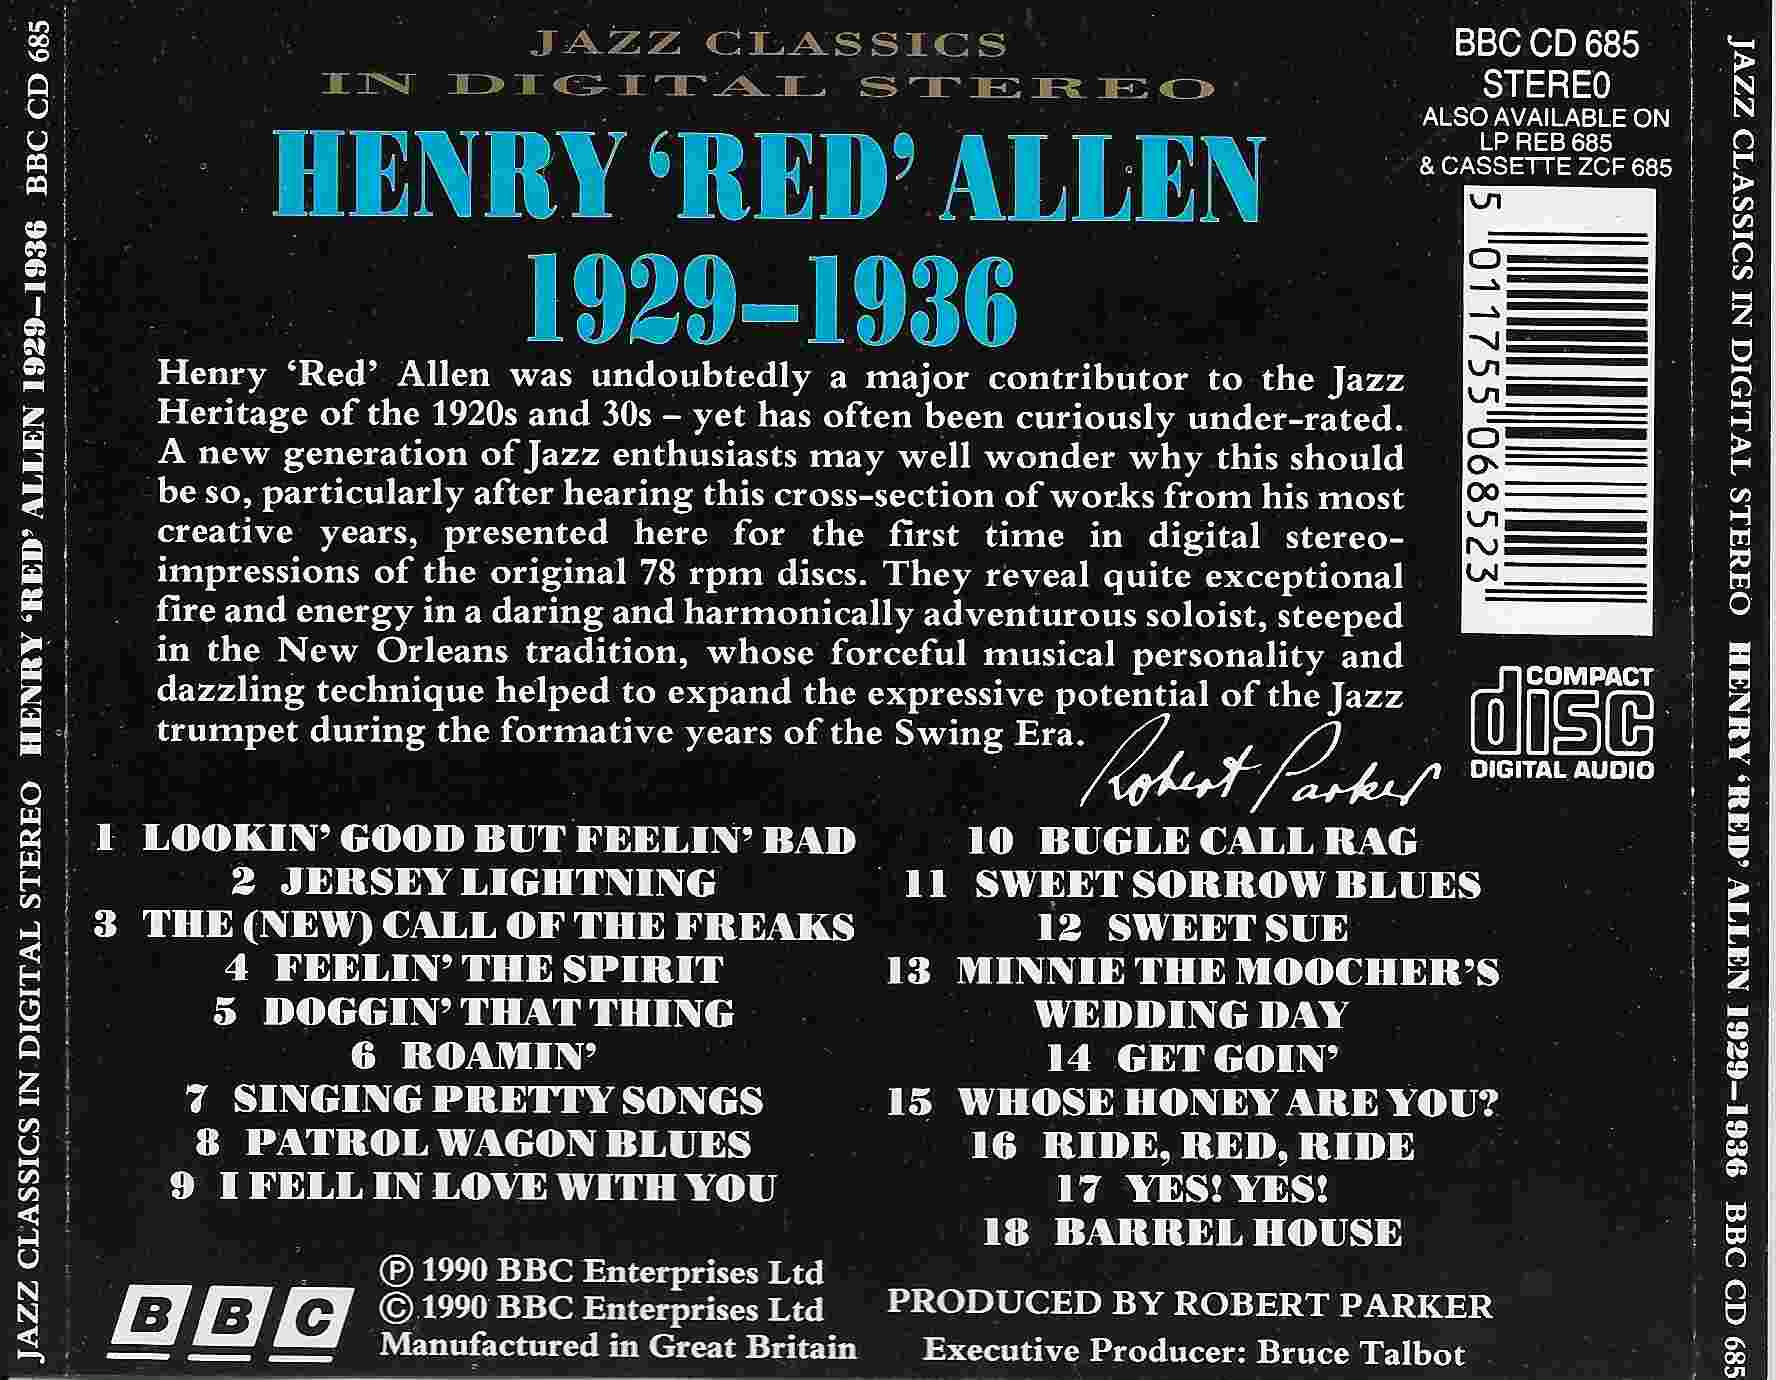 Back cover of BBCCD685